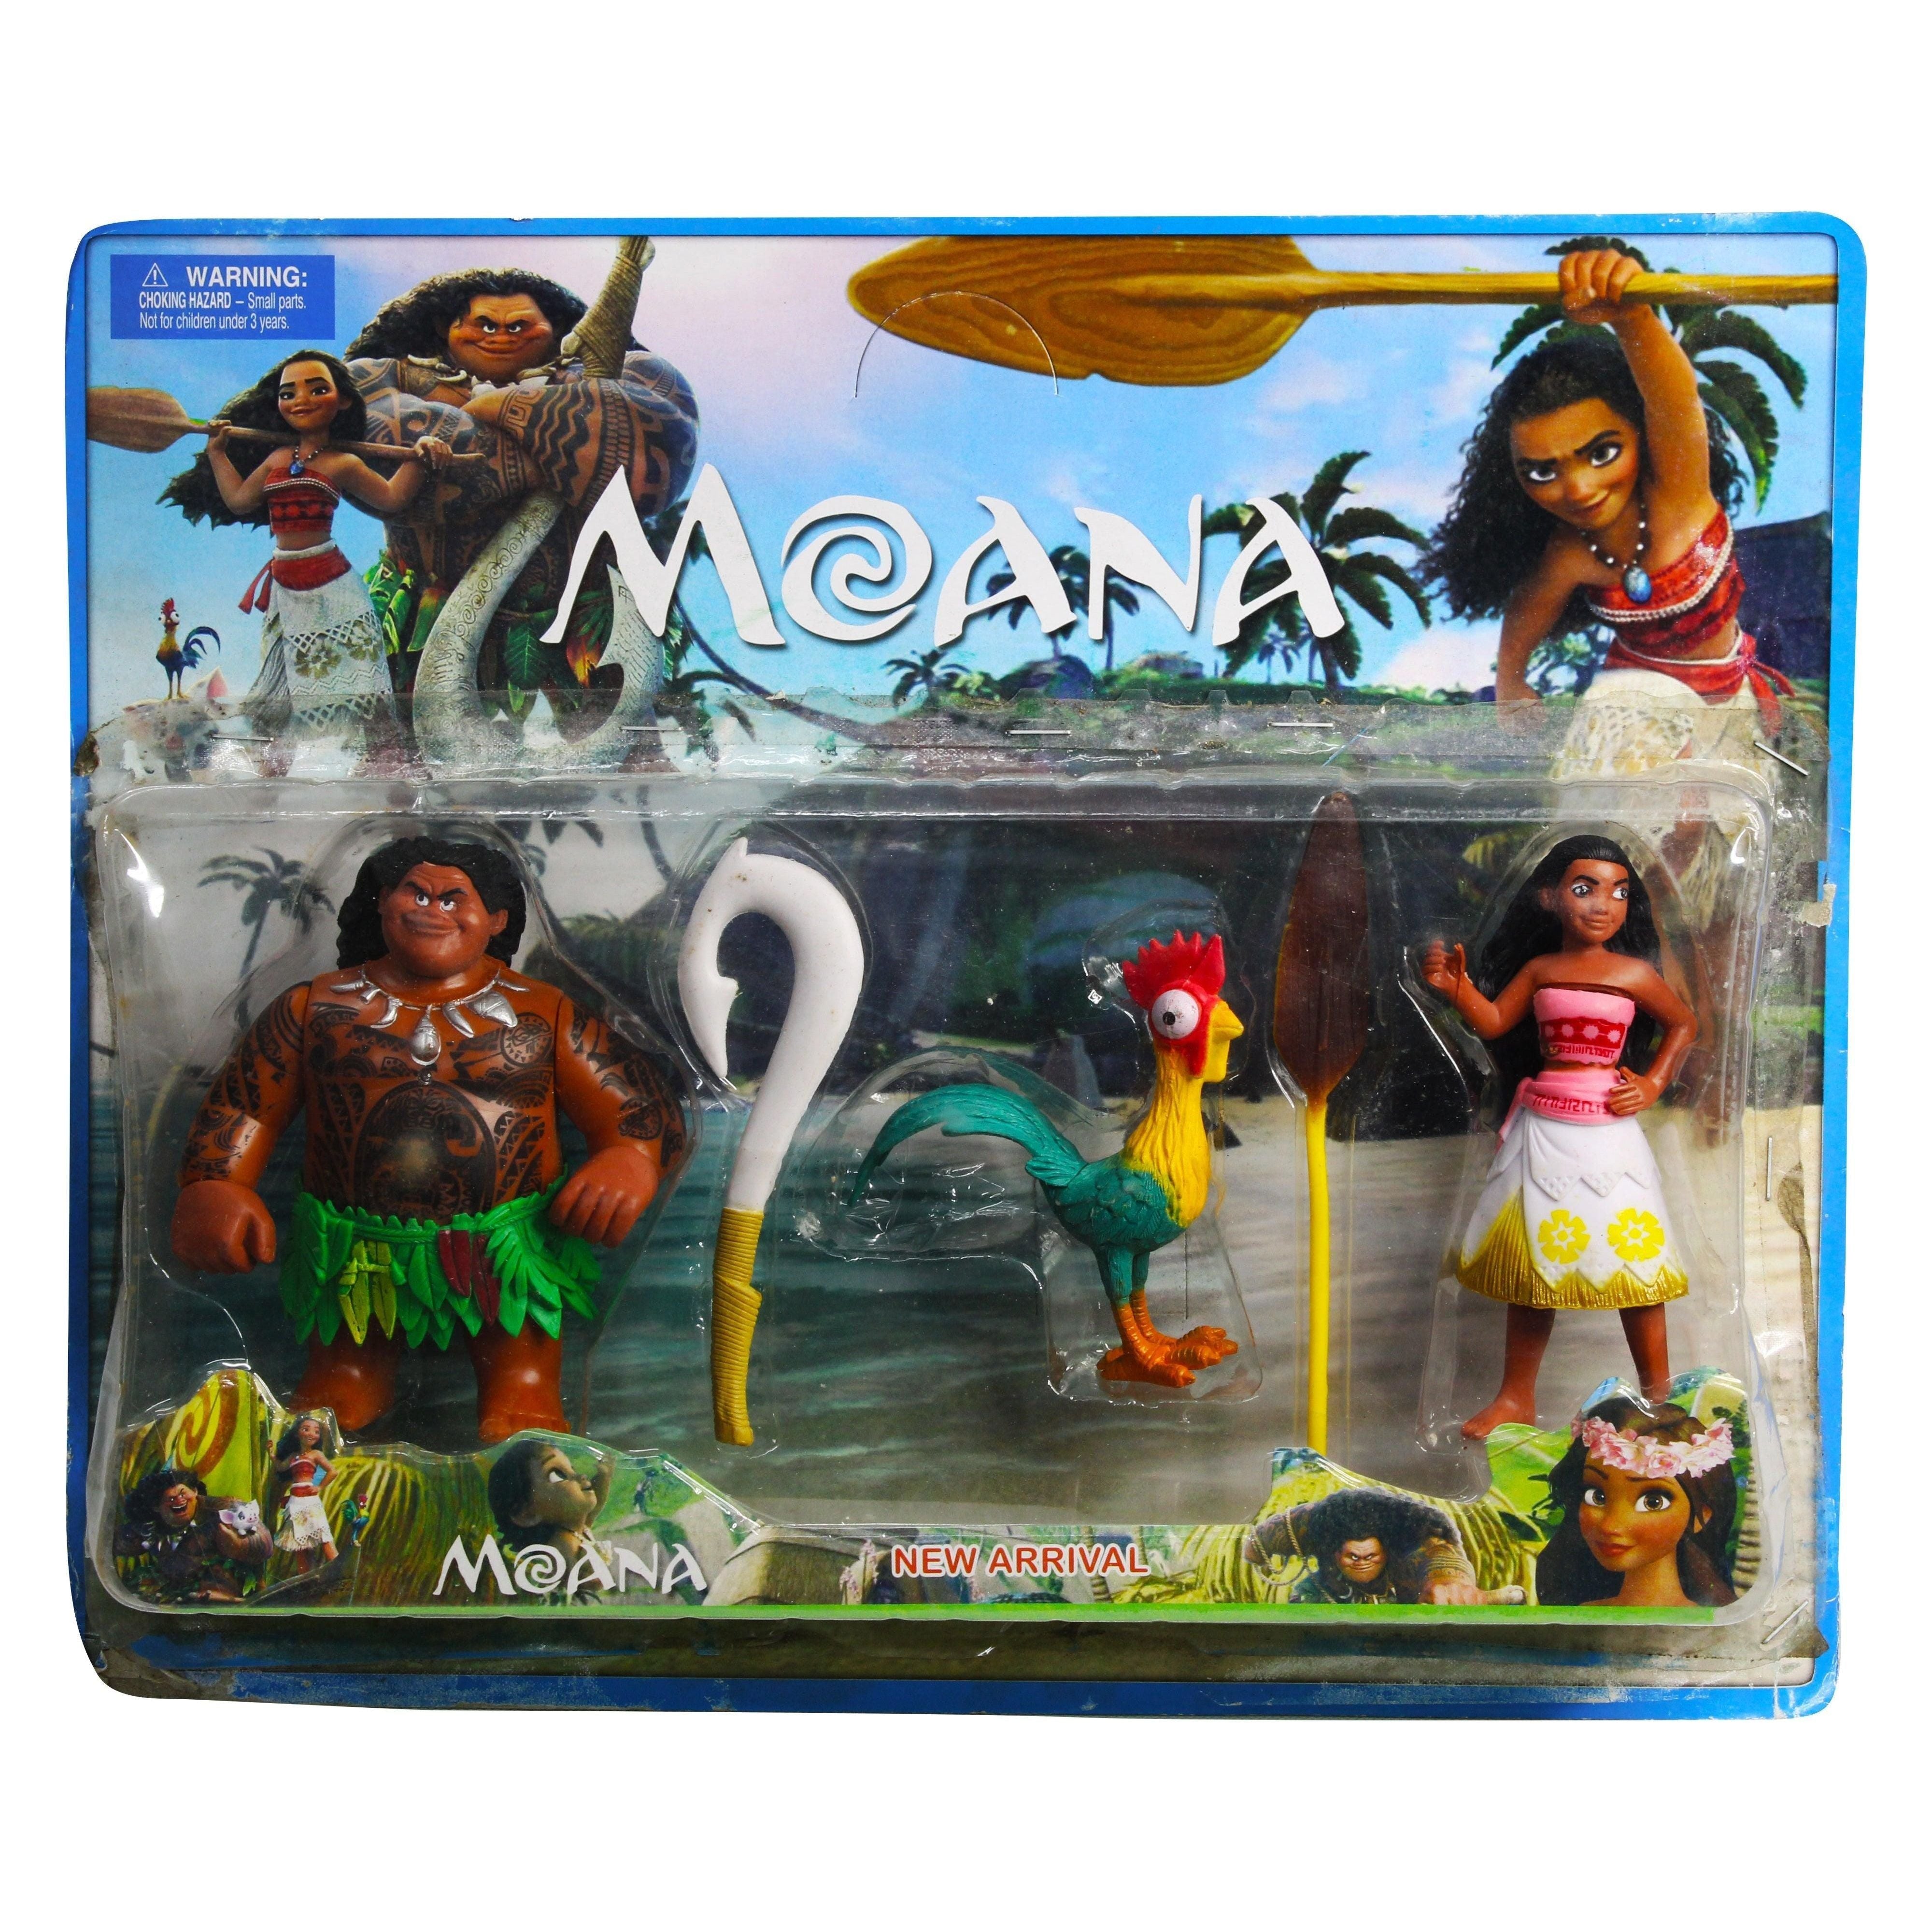 Moana Characters Play Set - BumbleToys - 5-7 Years, Fashion Dolls & Accessories, Girls, Moana, Toy House